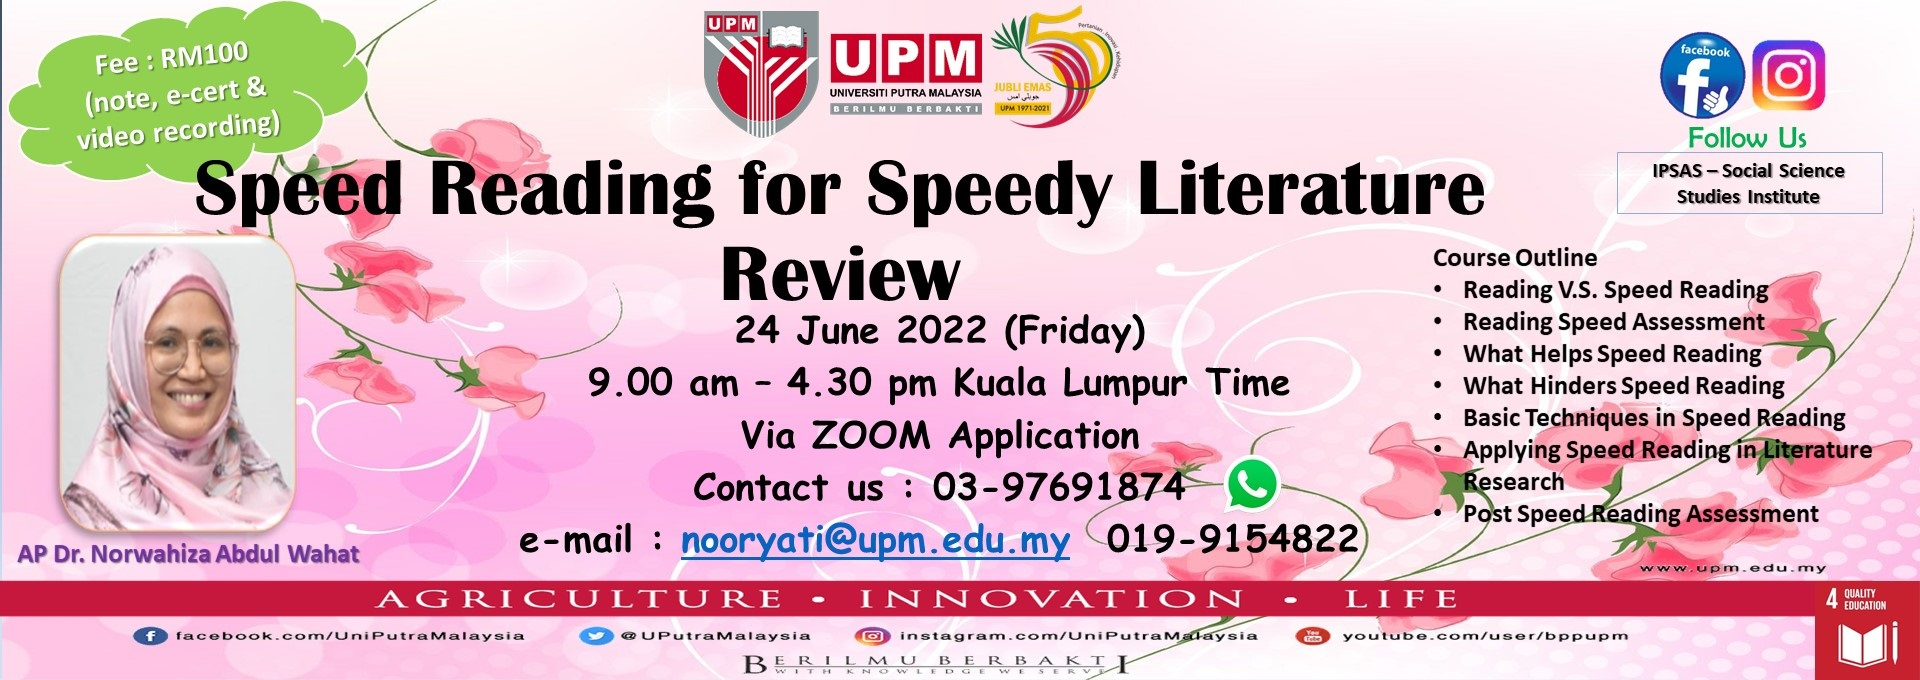 Speed Reading for Speedy Literature Review